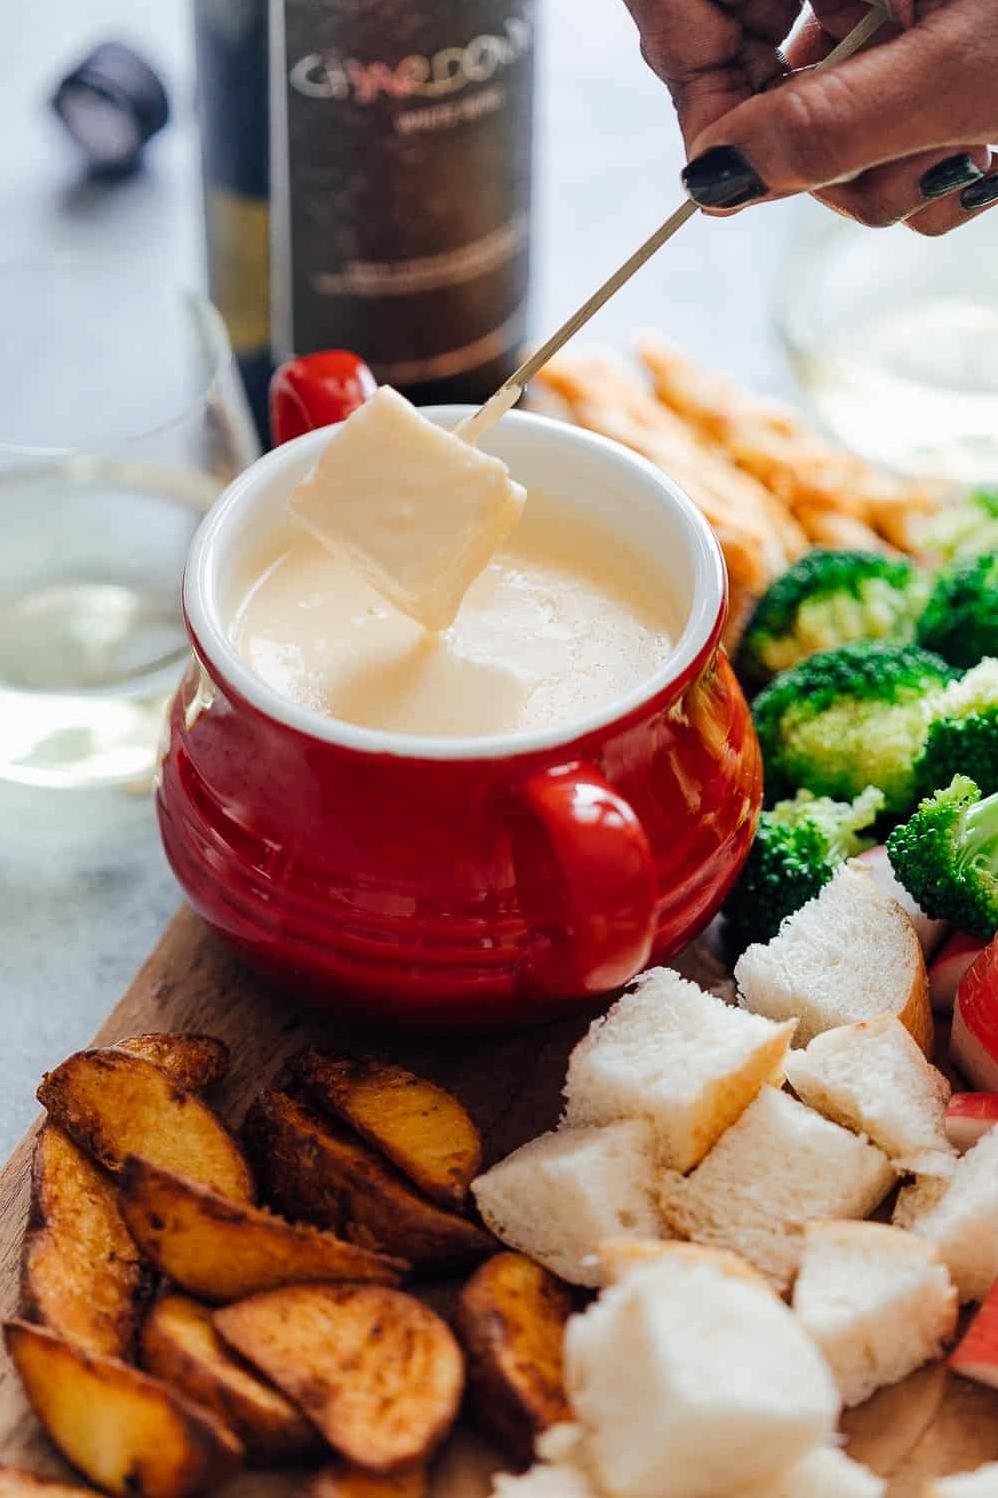  Add a splash of wine to the bubbling pot of cheese to take your fondue to the next level of flavor and complexity.